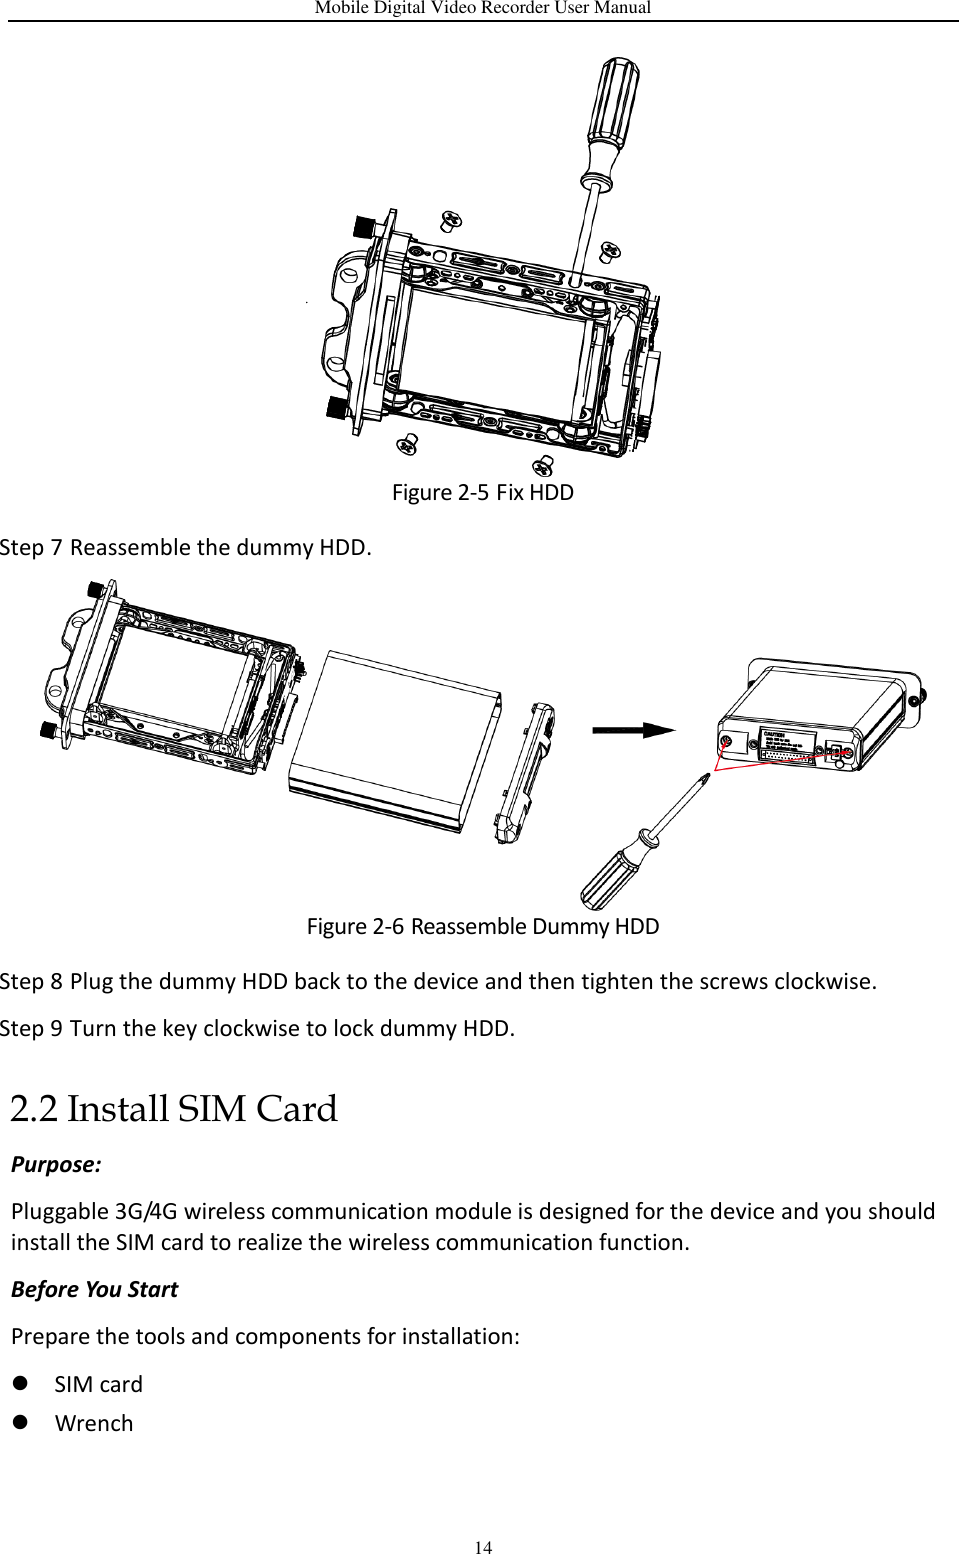 Mobile Digital Video Recorder User Manual 14  Figure 2-5 Fix HDD Step 7 Reassemble the dummy HDD.  Figure 2-6 Reassemble Dummy HDD Step 8 Plug the dummy HDD back to the device and then tighten the screws clockwise. Step 9 Turn the key clockwise to lock dummy HDD. 2.2 Install SIM Card Purpose: Pluggable 3G/4G wireless communication module is designed for the device and you should install the SIM card to realize the wireless communication function. Before You Start Prepare the tools and components for installation:    SIM card  Wrench 